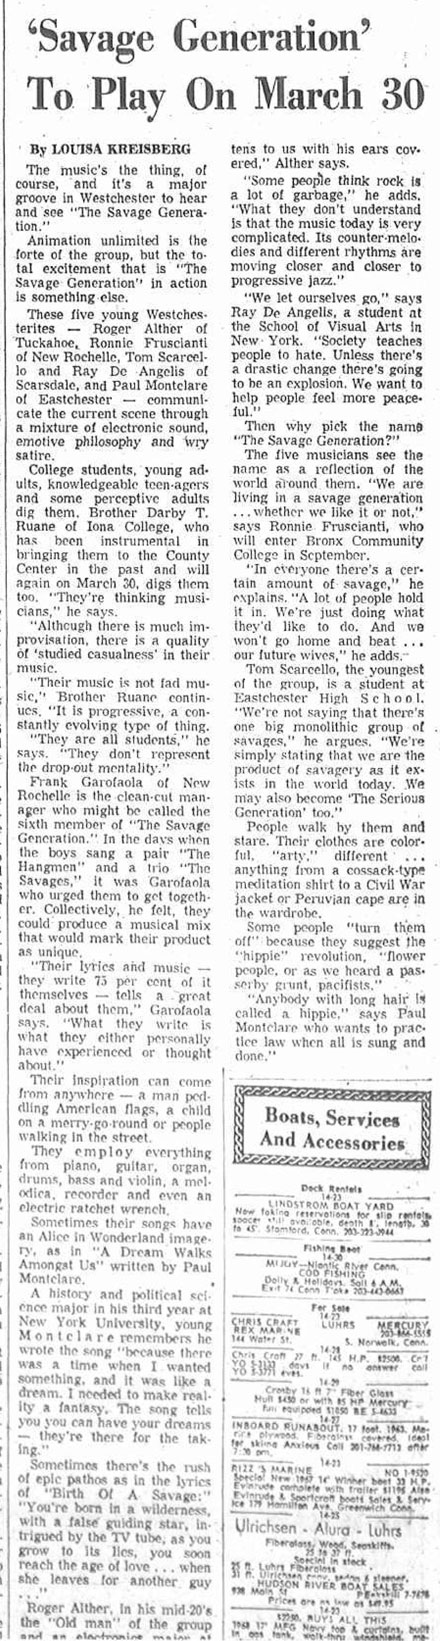 The Savage Generation, profiled in the Herald Statesman, March 23, 1968